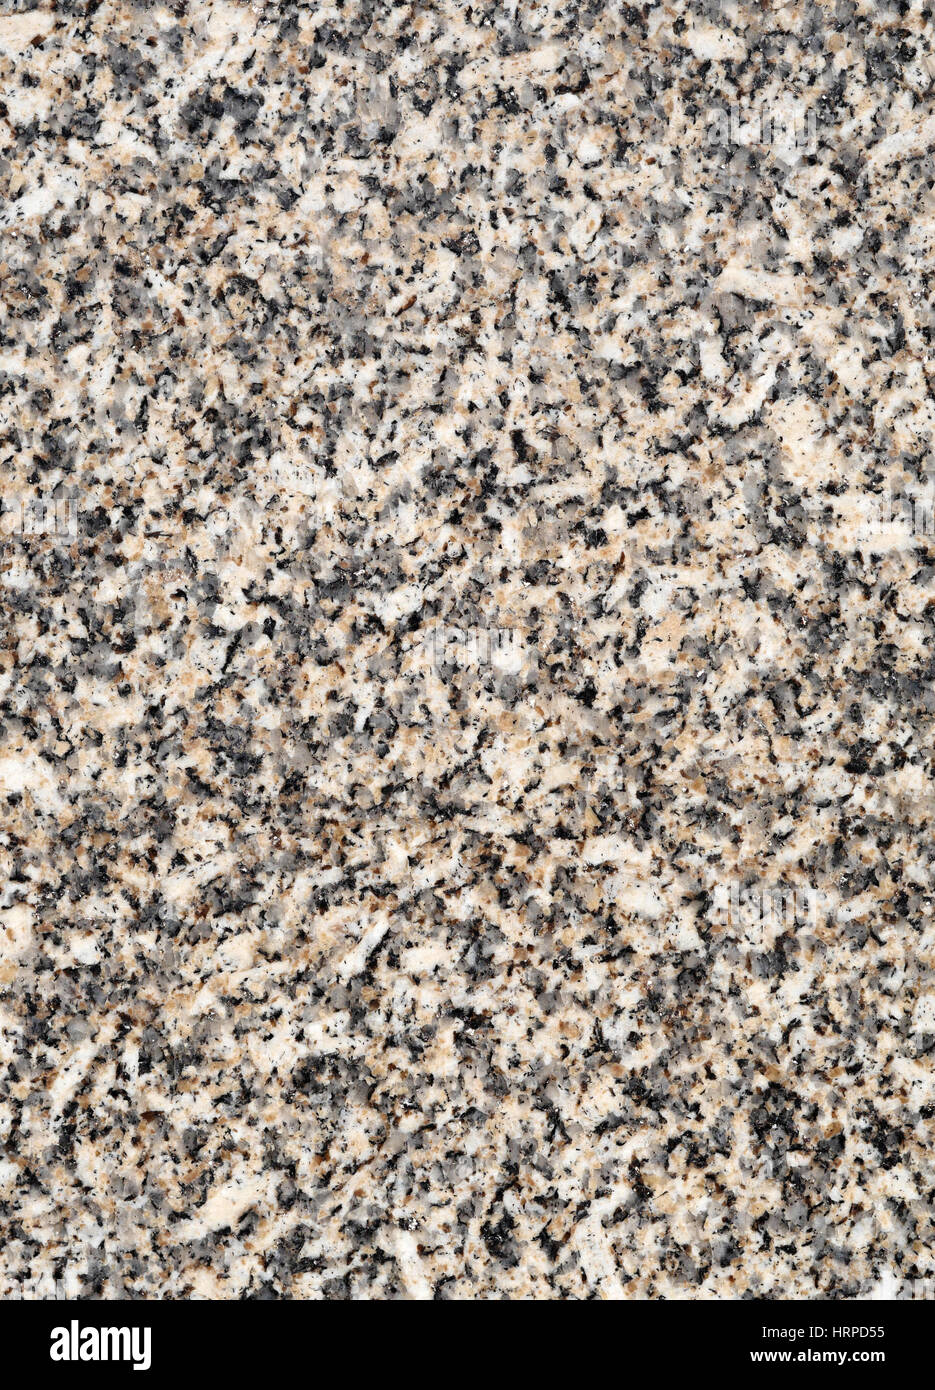 Marble granite stone cut section texture detail background. Stock Photo